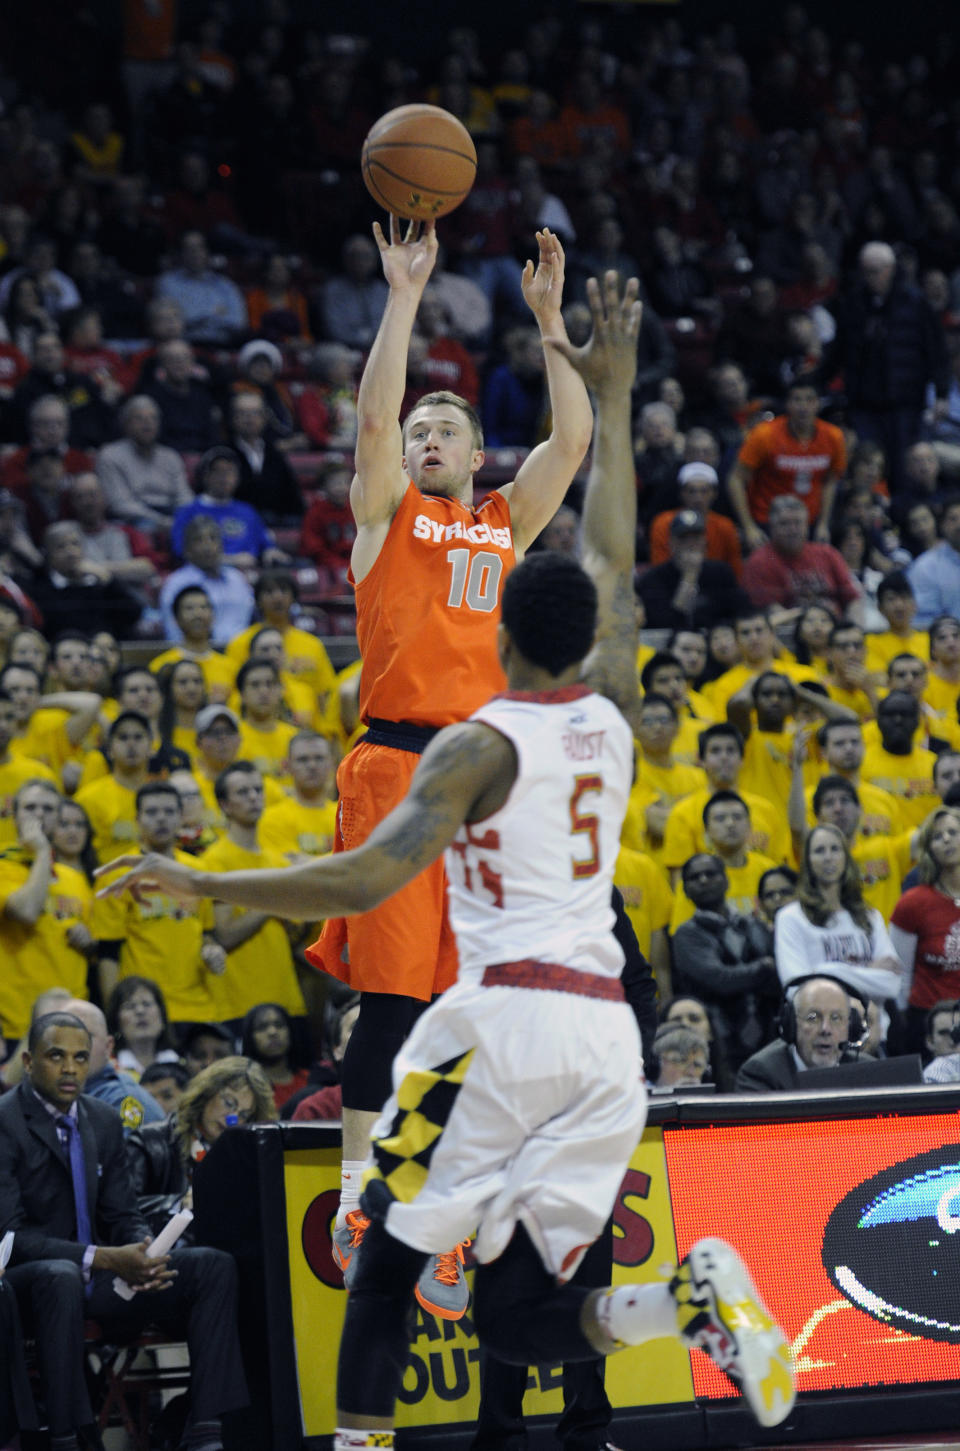 Syracuse guard Trevor Cooney (10) shoots as Maryland guard Nick Faust (5) defends during the first half of an NCAA college basketball game, Monday, Feb. 24, 2014, in College Park, Md. (AP Photo/Nick Wass)